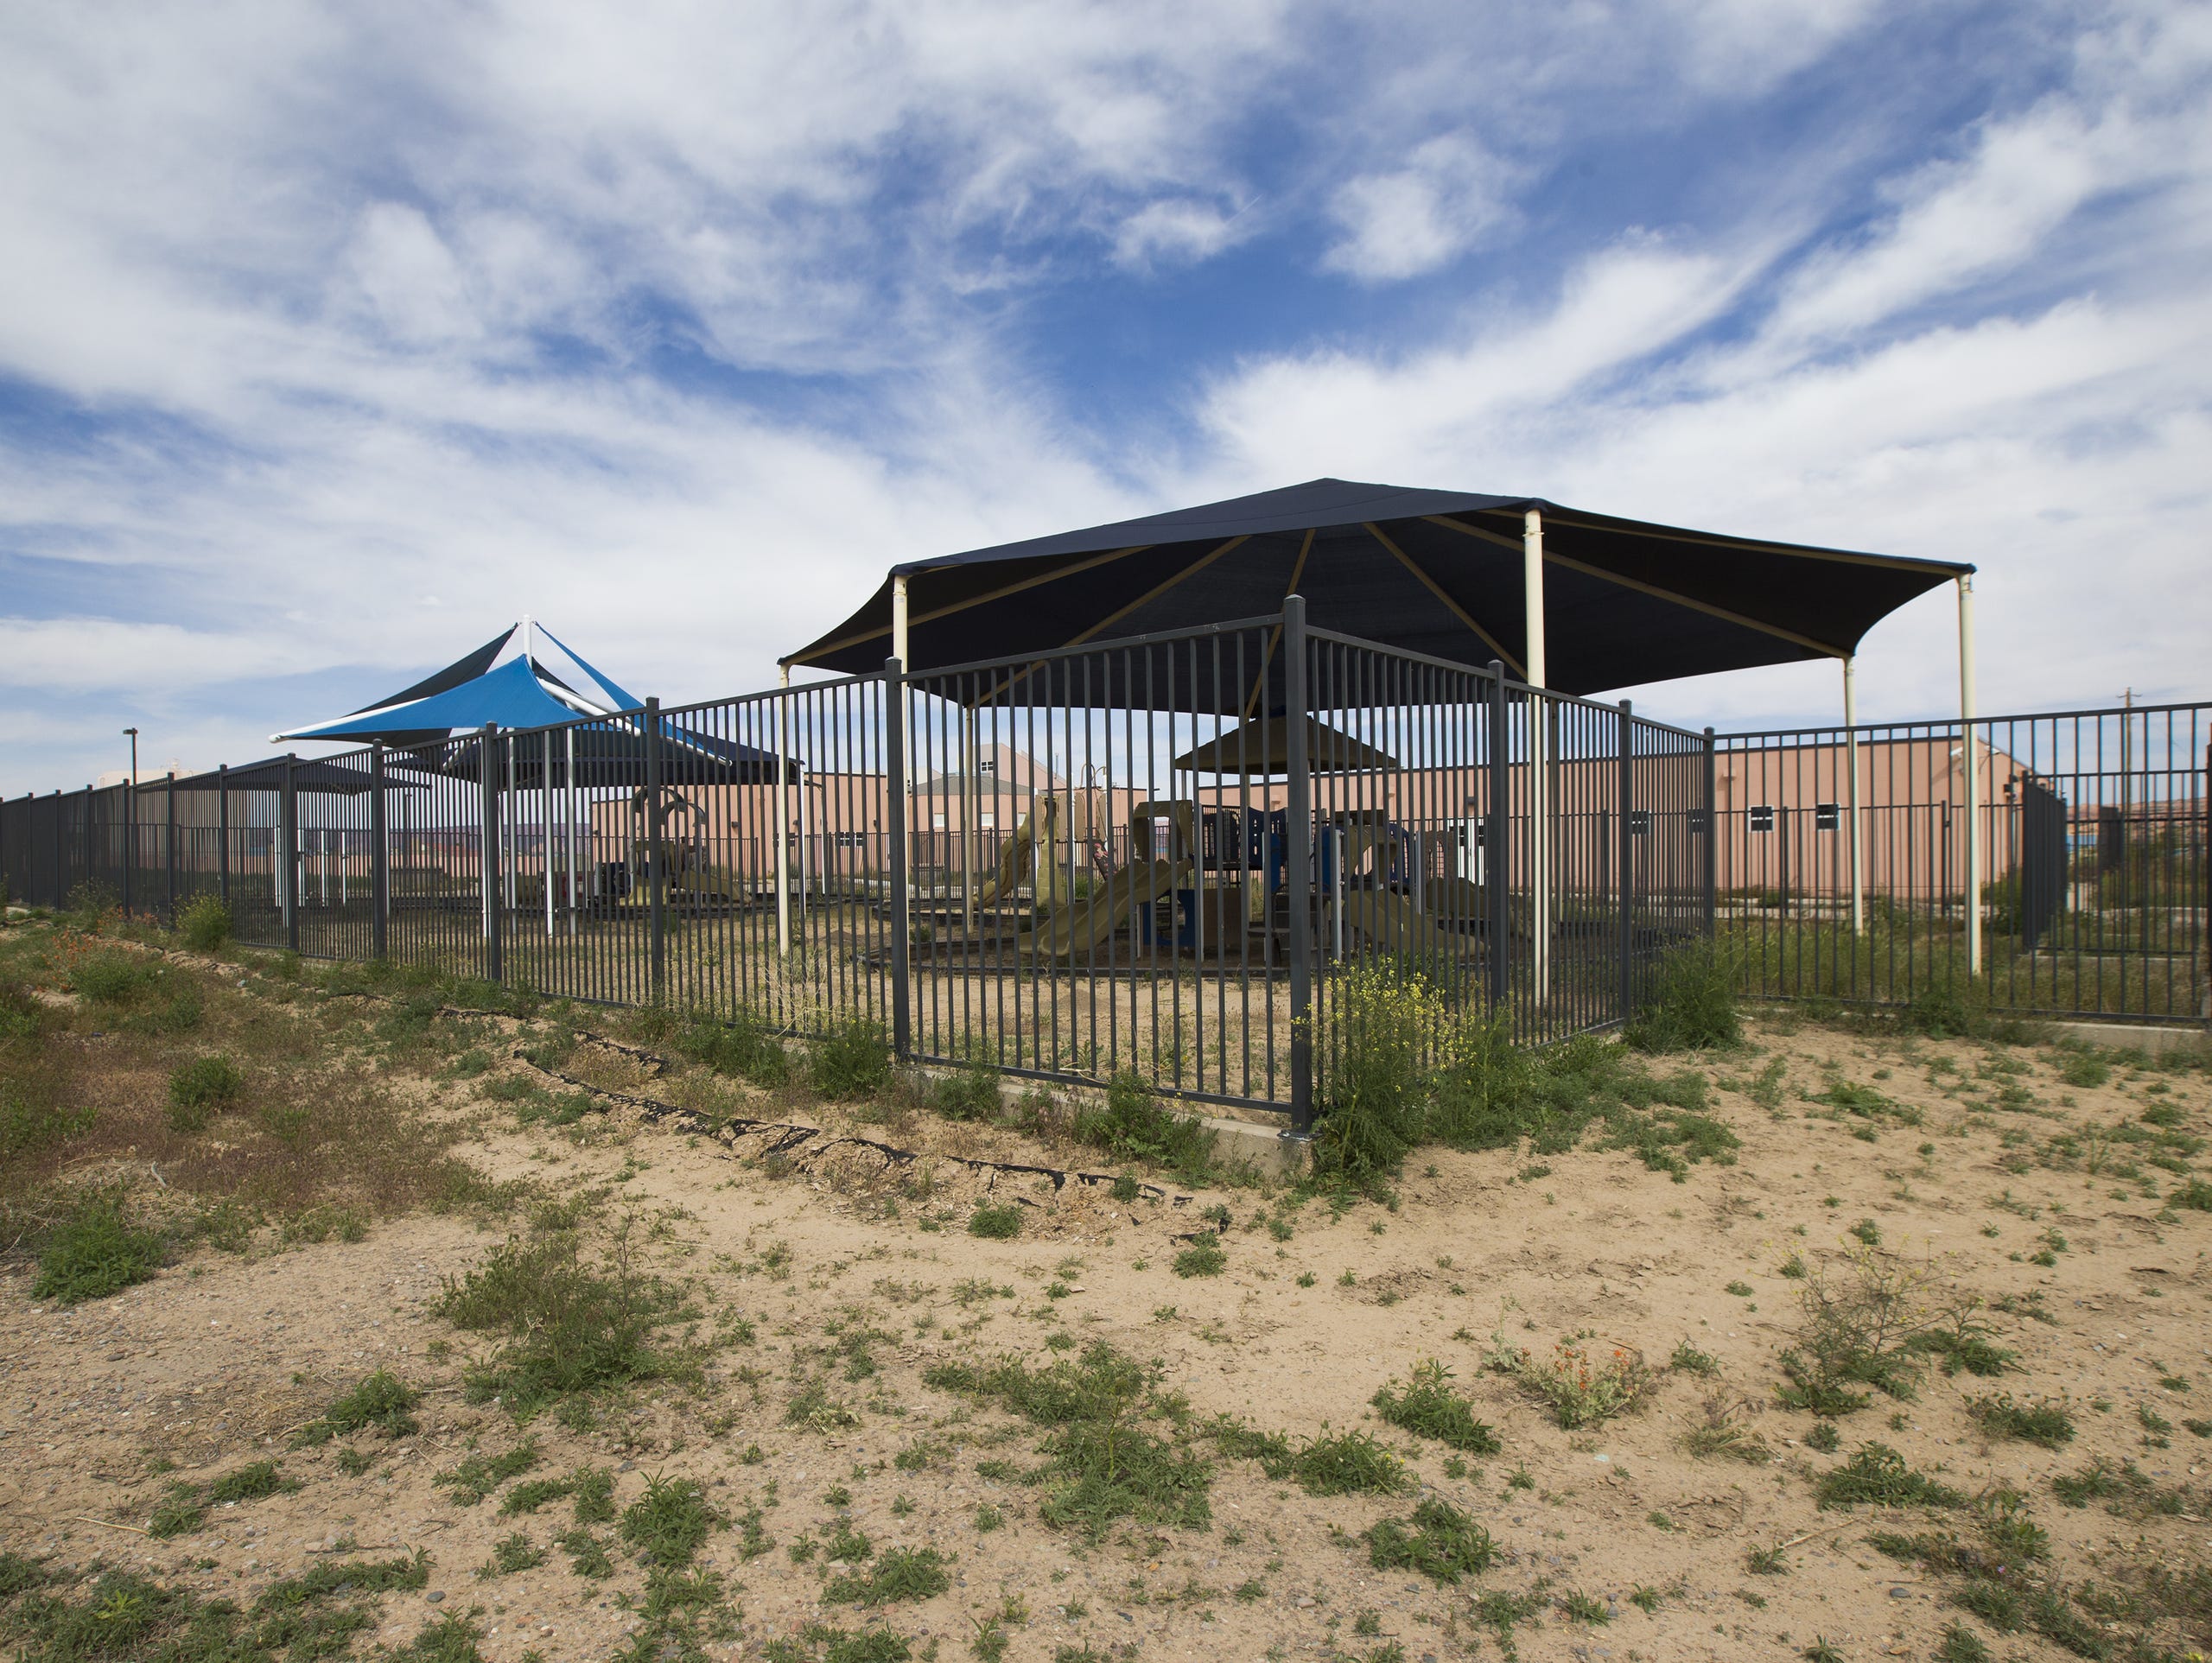 Weeds overrun a women's shelter built by the Navajo Housing Authority in Kayenta, AZ May 11, 2015. It was built but never occupied. Despite the NHA having over a quarter of a billion dollars of unspent grant money, many Navajos live in poor conditions.